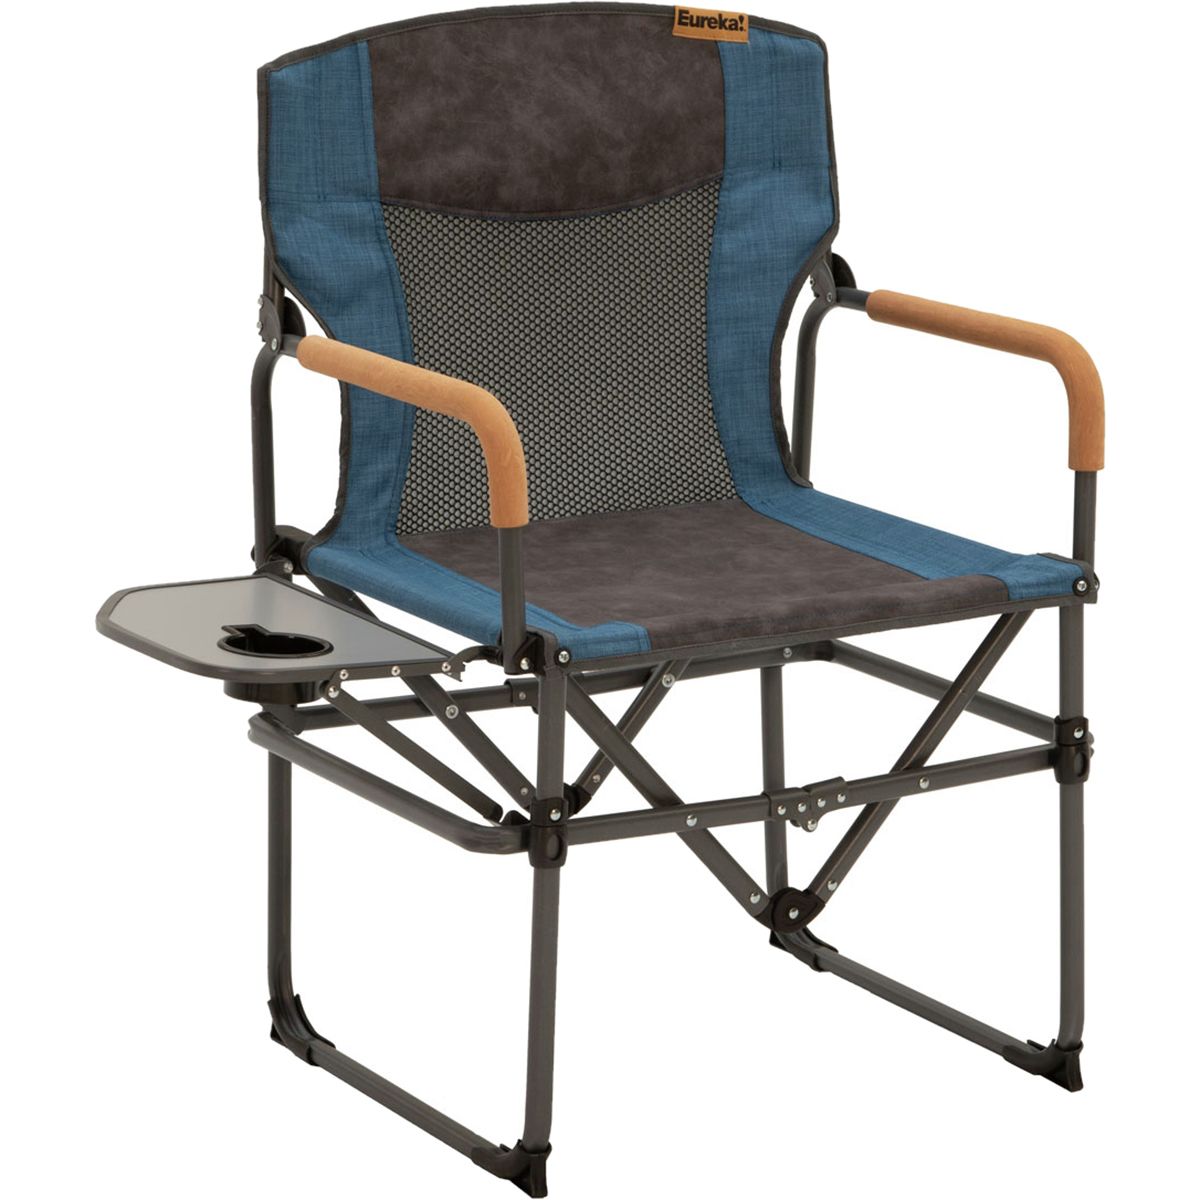 Yeti Hondo Base Camp Chair Review - Expedition Portal